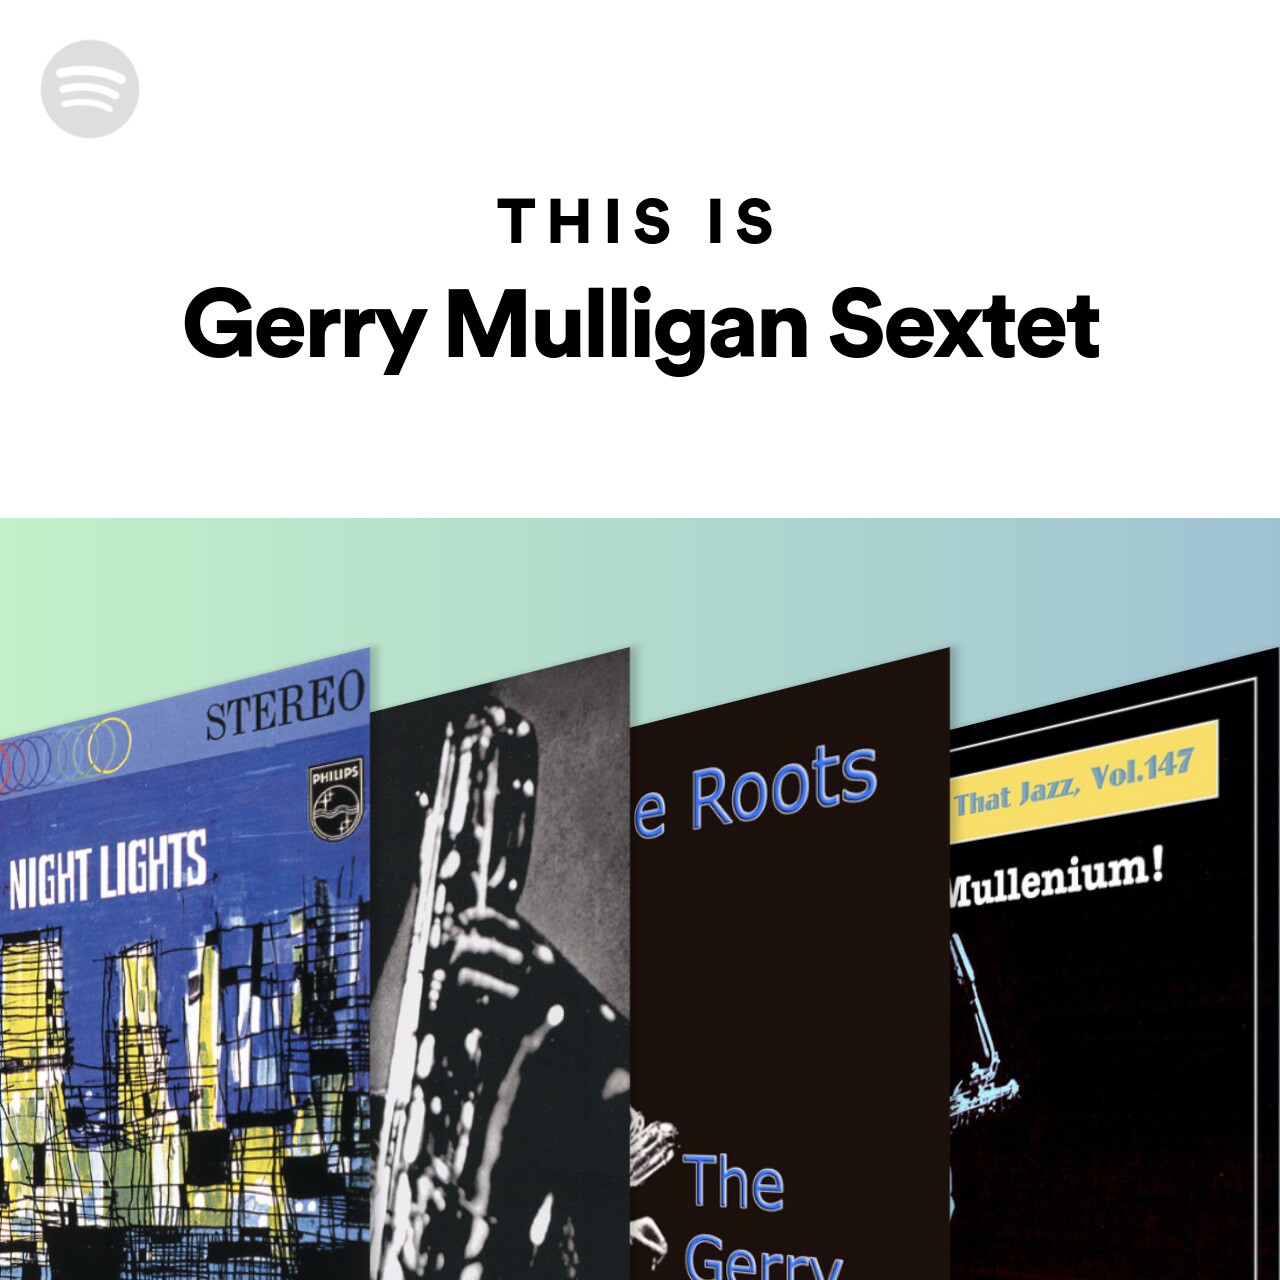 This Is Gerry Mulligan Sextet